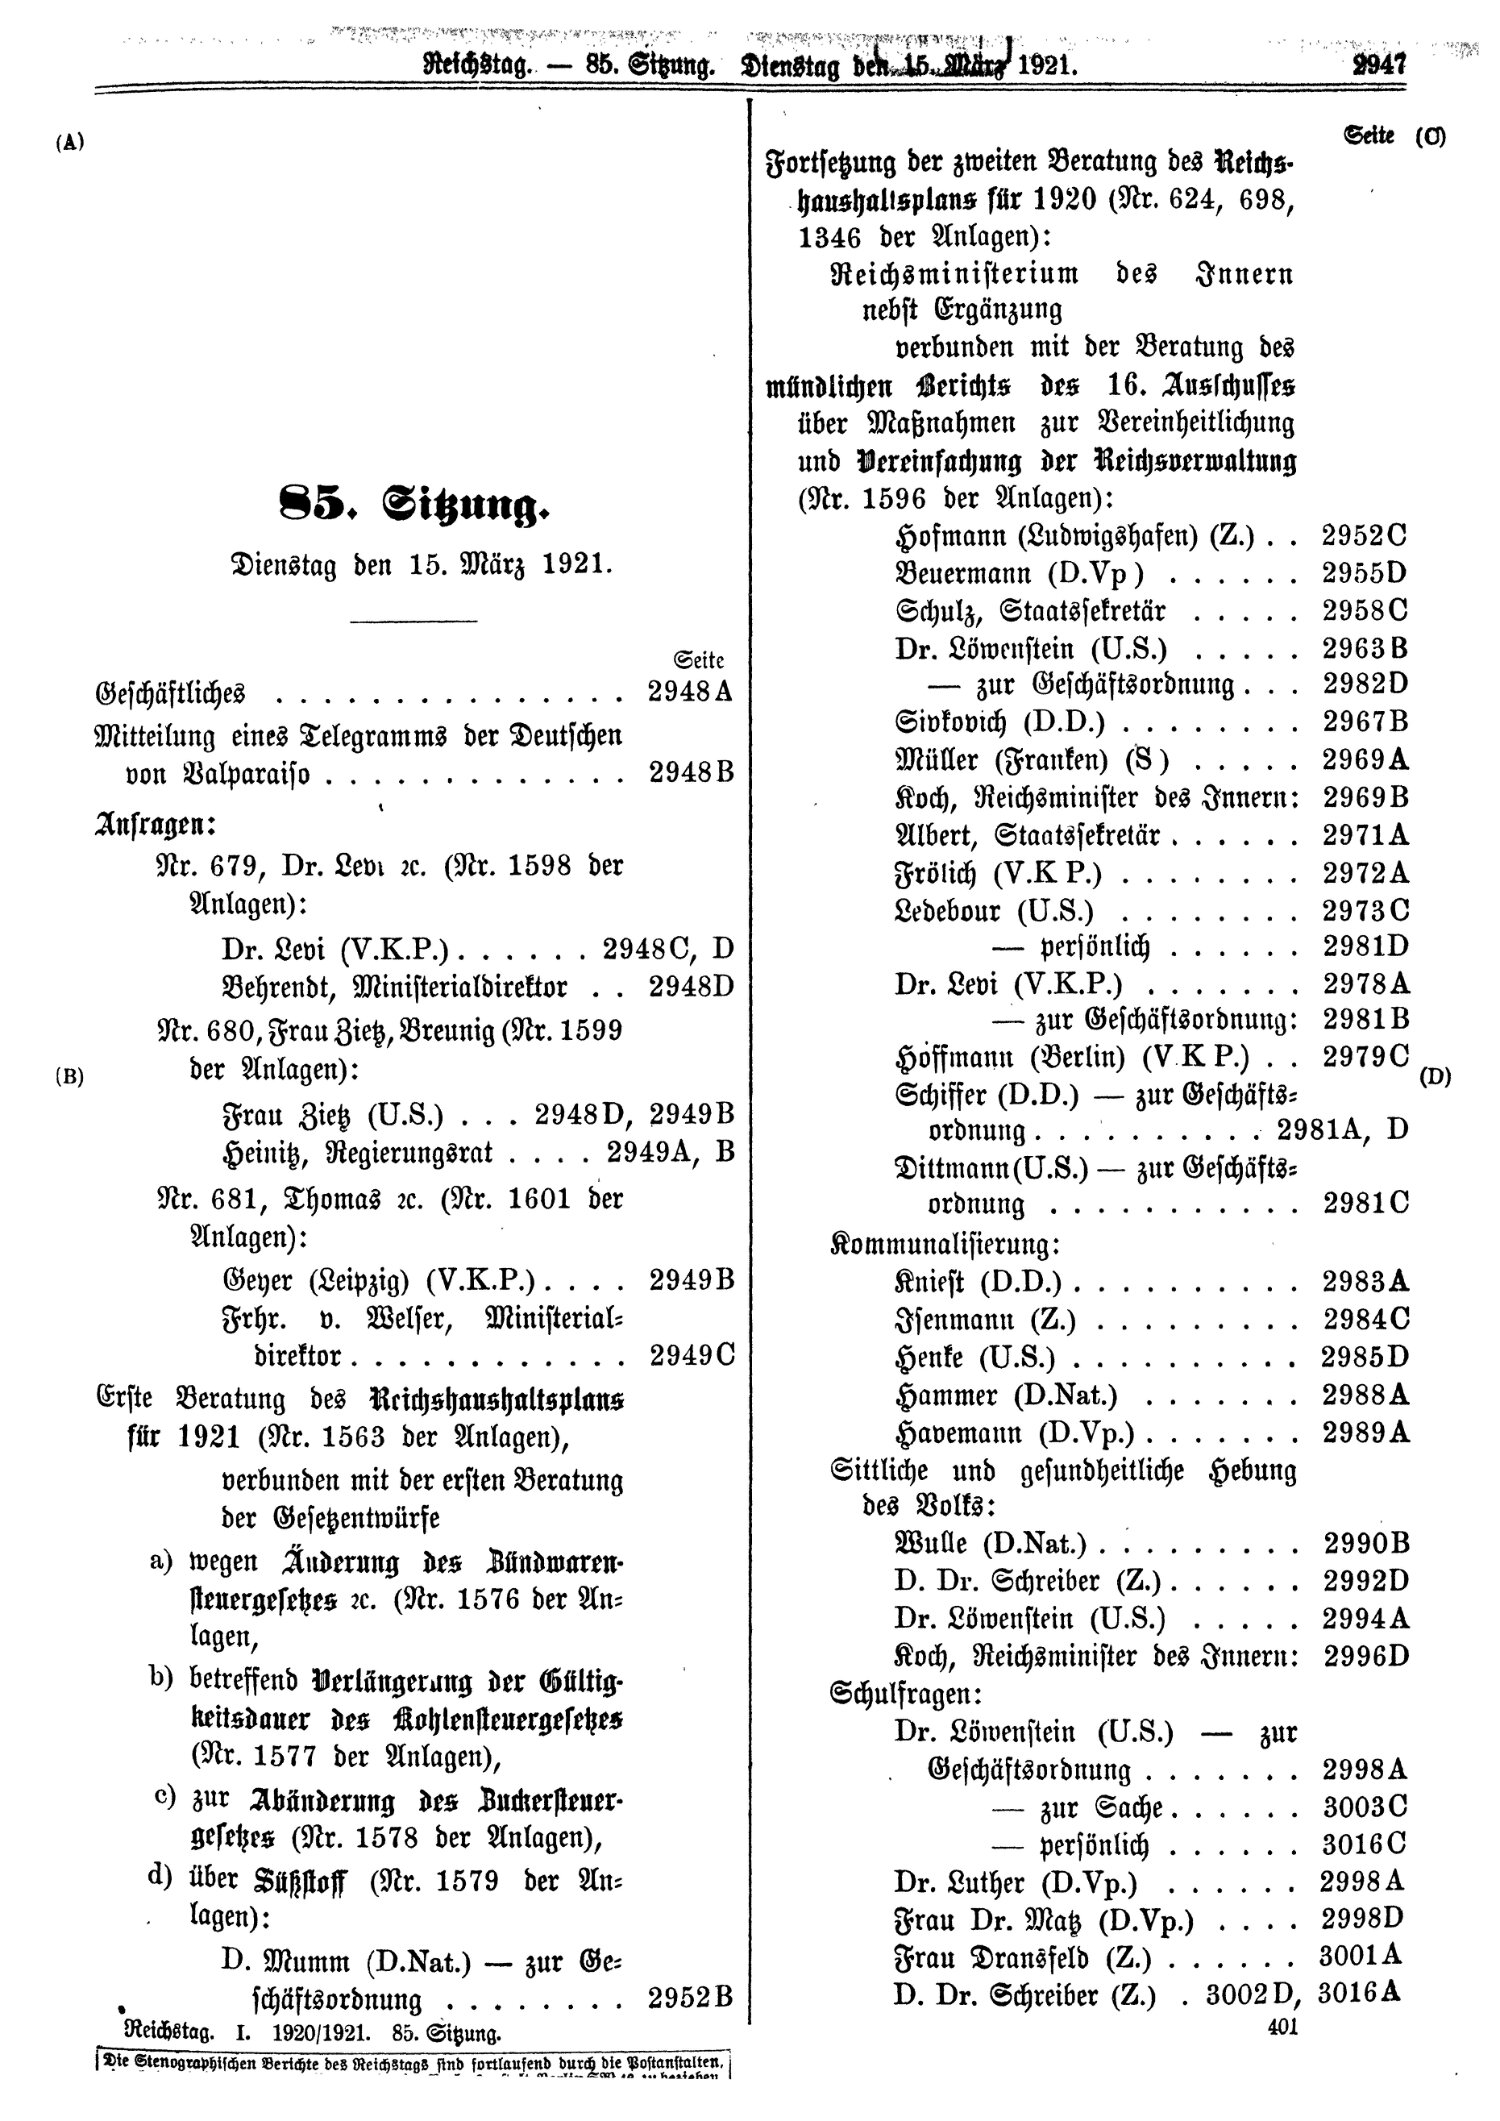 Scan of page 2947